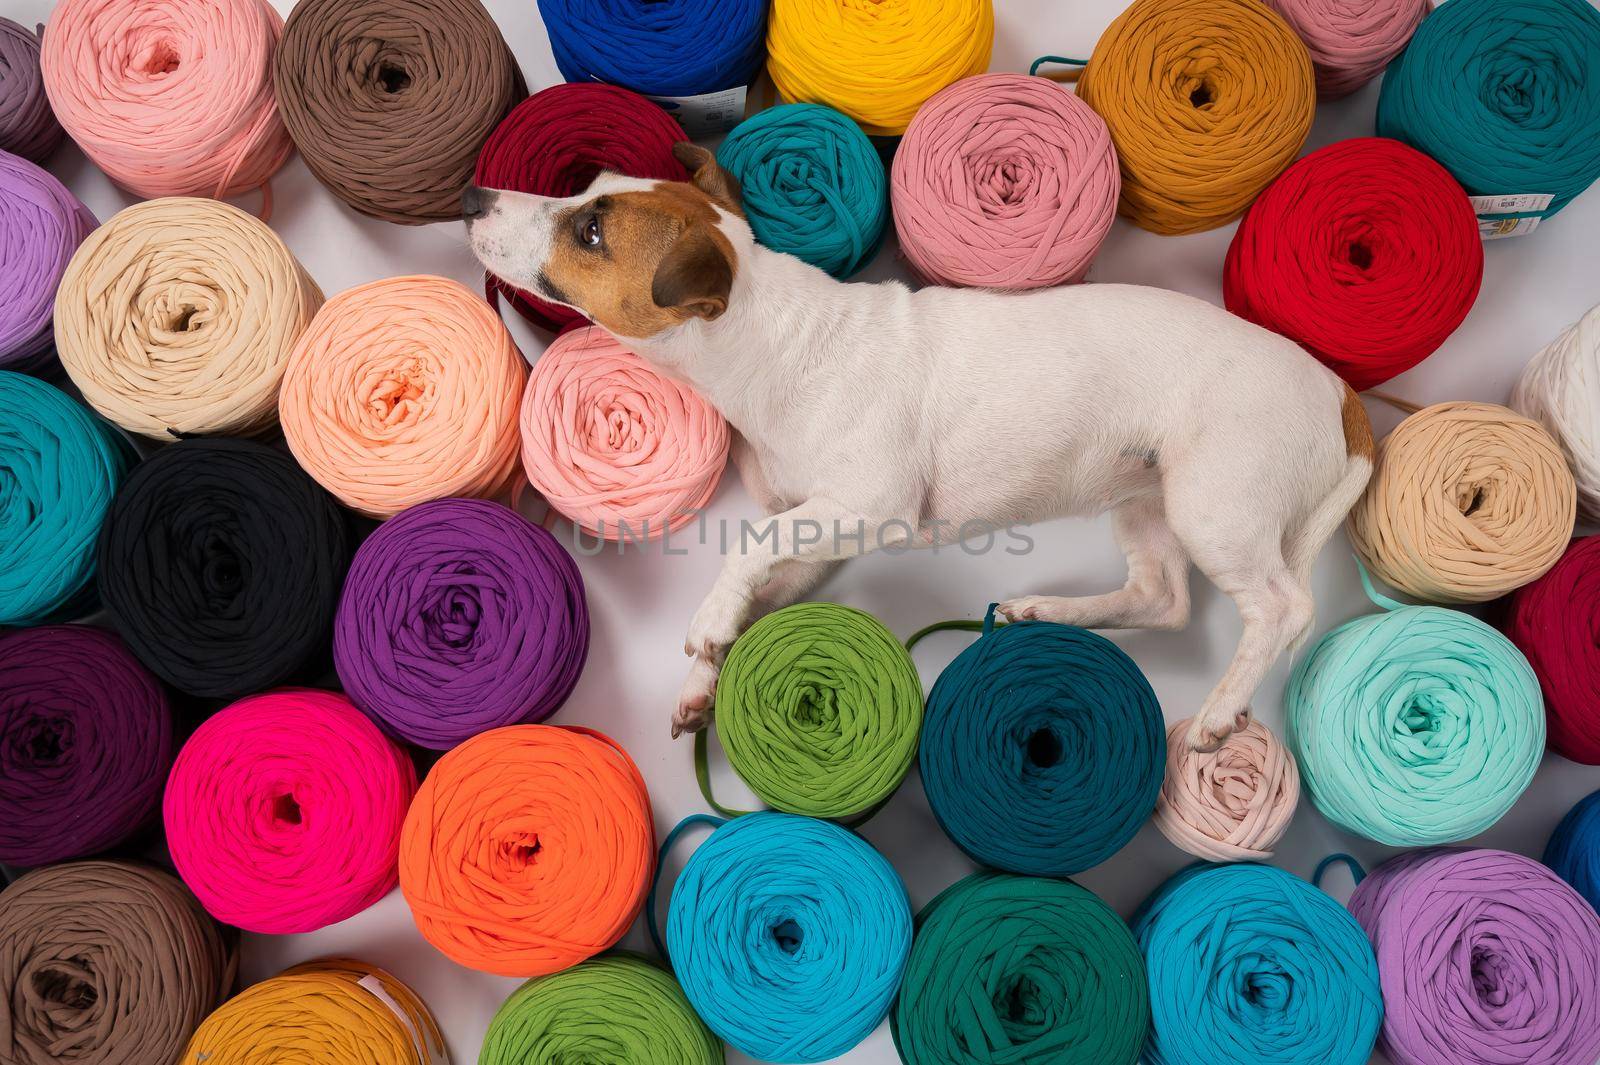 Close-up of Jack Russell Terrier dog among multi-colored cotton skeins